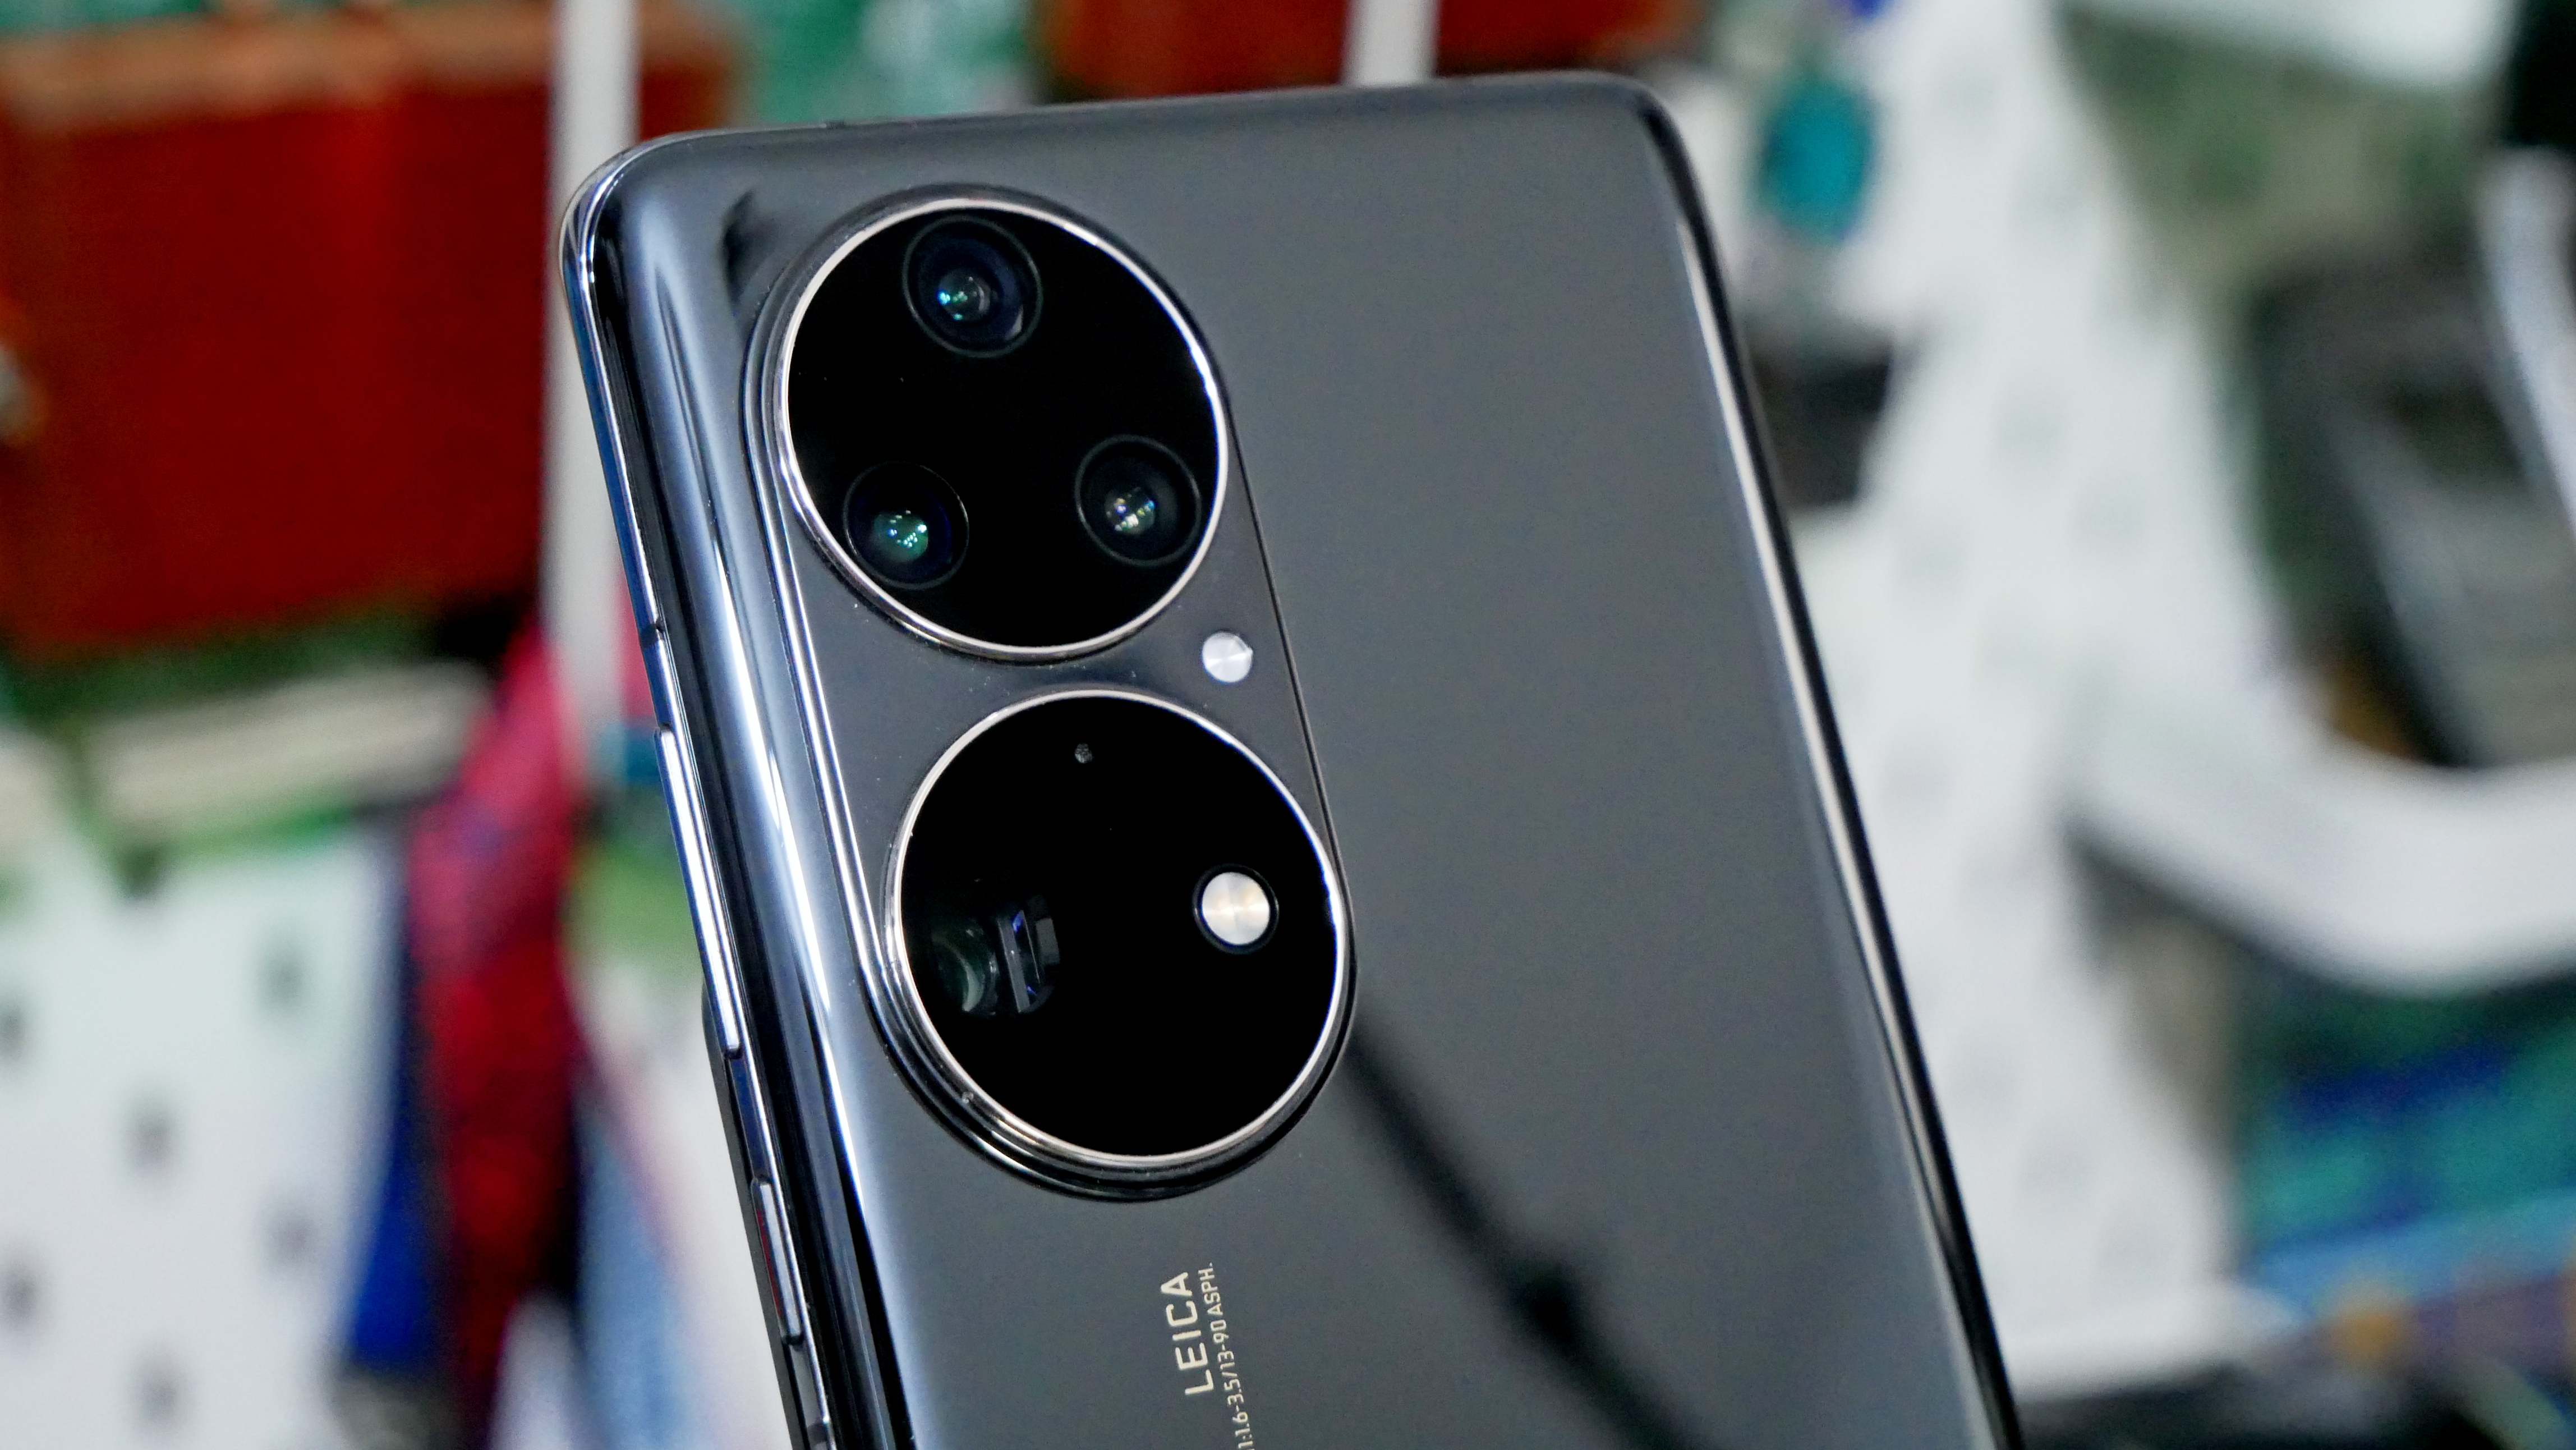 The image and features of the Huawei P50 Pro + have been revealed